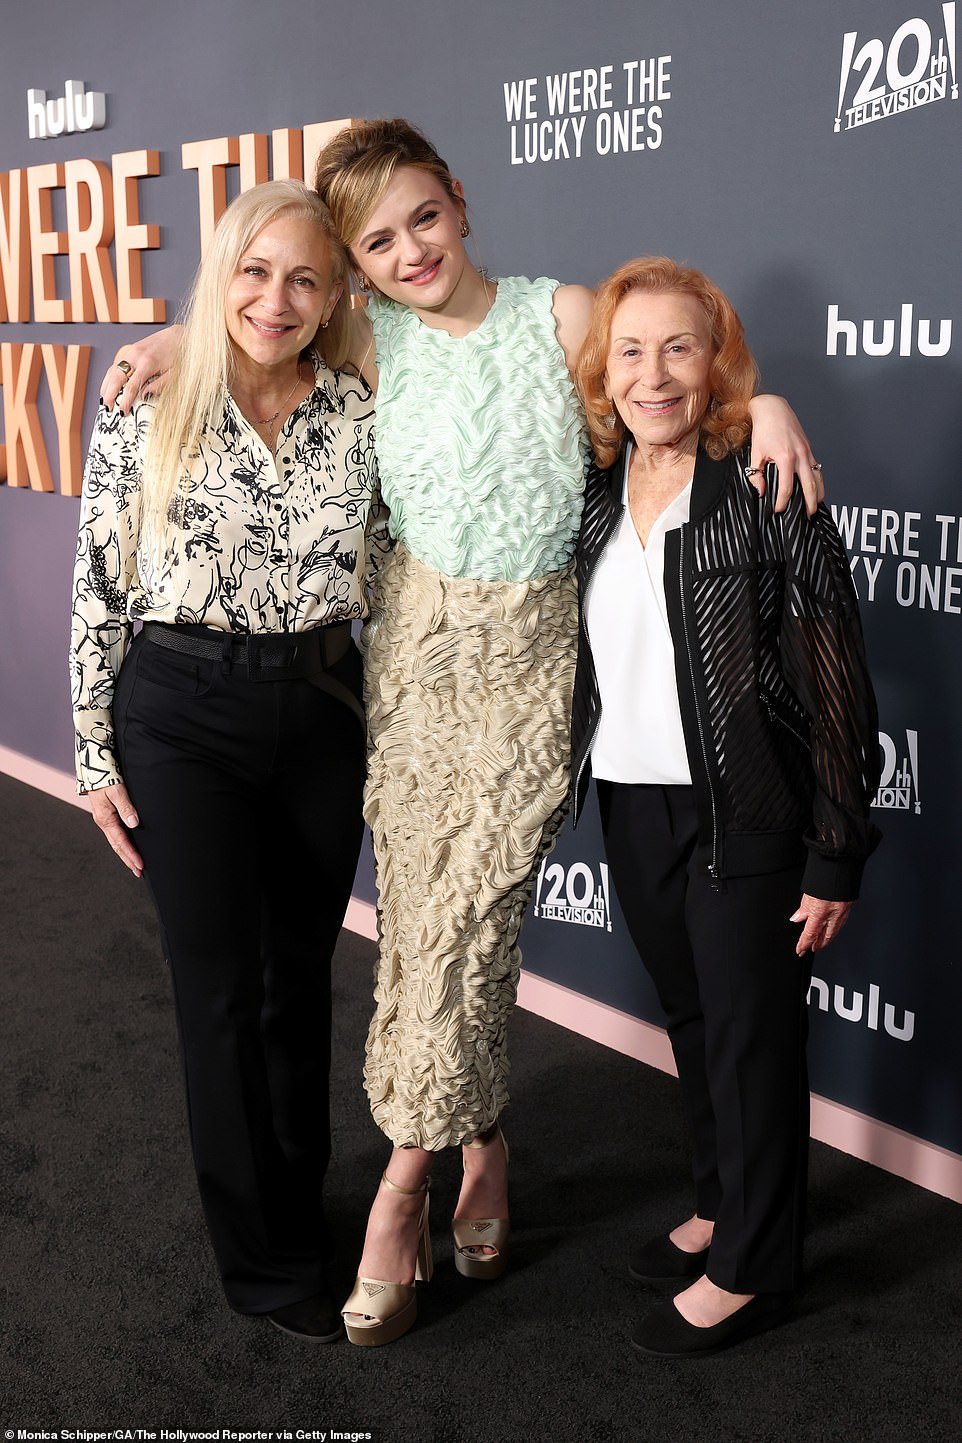 Her beloved mother Jamie King (L) and grandmother Elaine Farrar (R) also joined Joey on the black carpet.